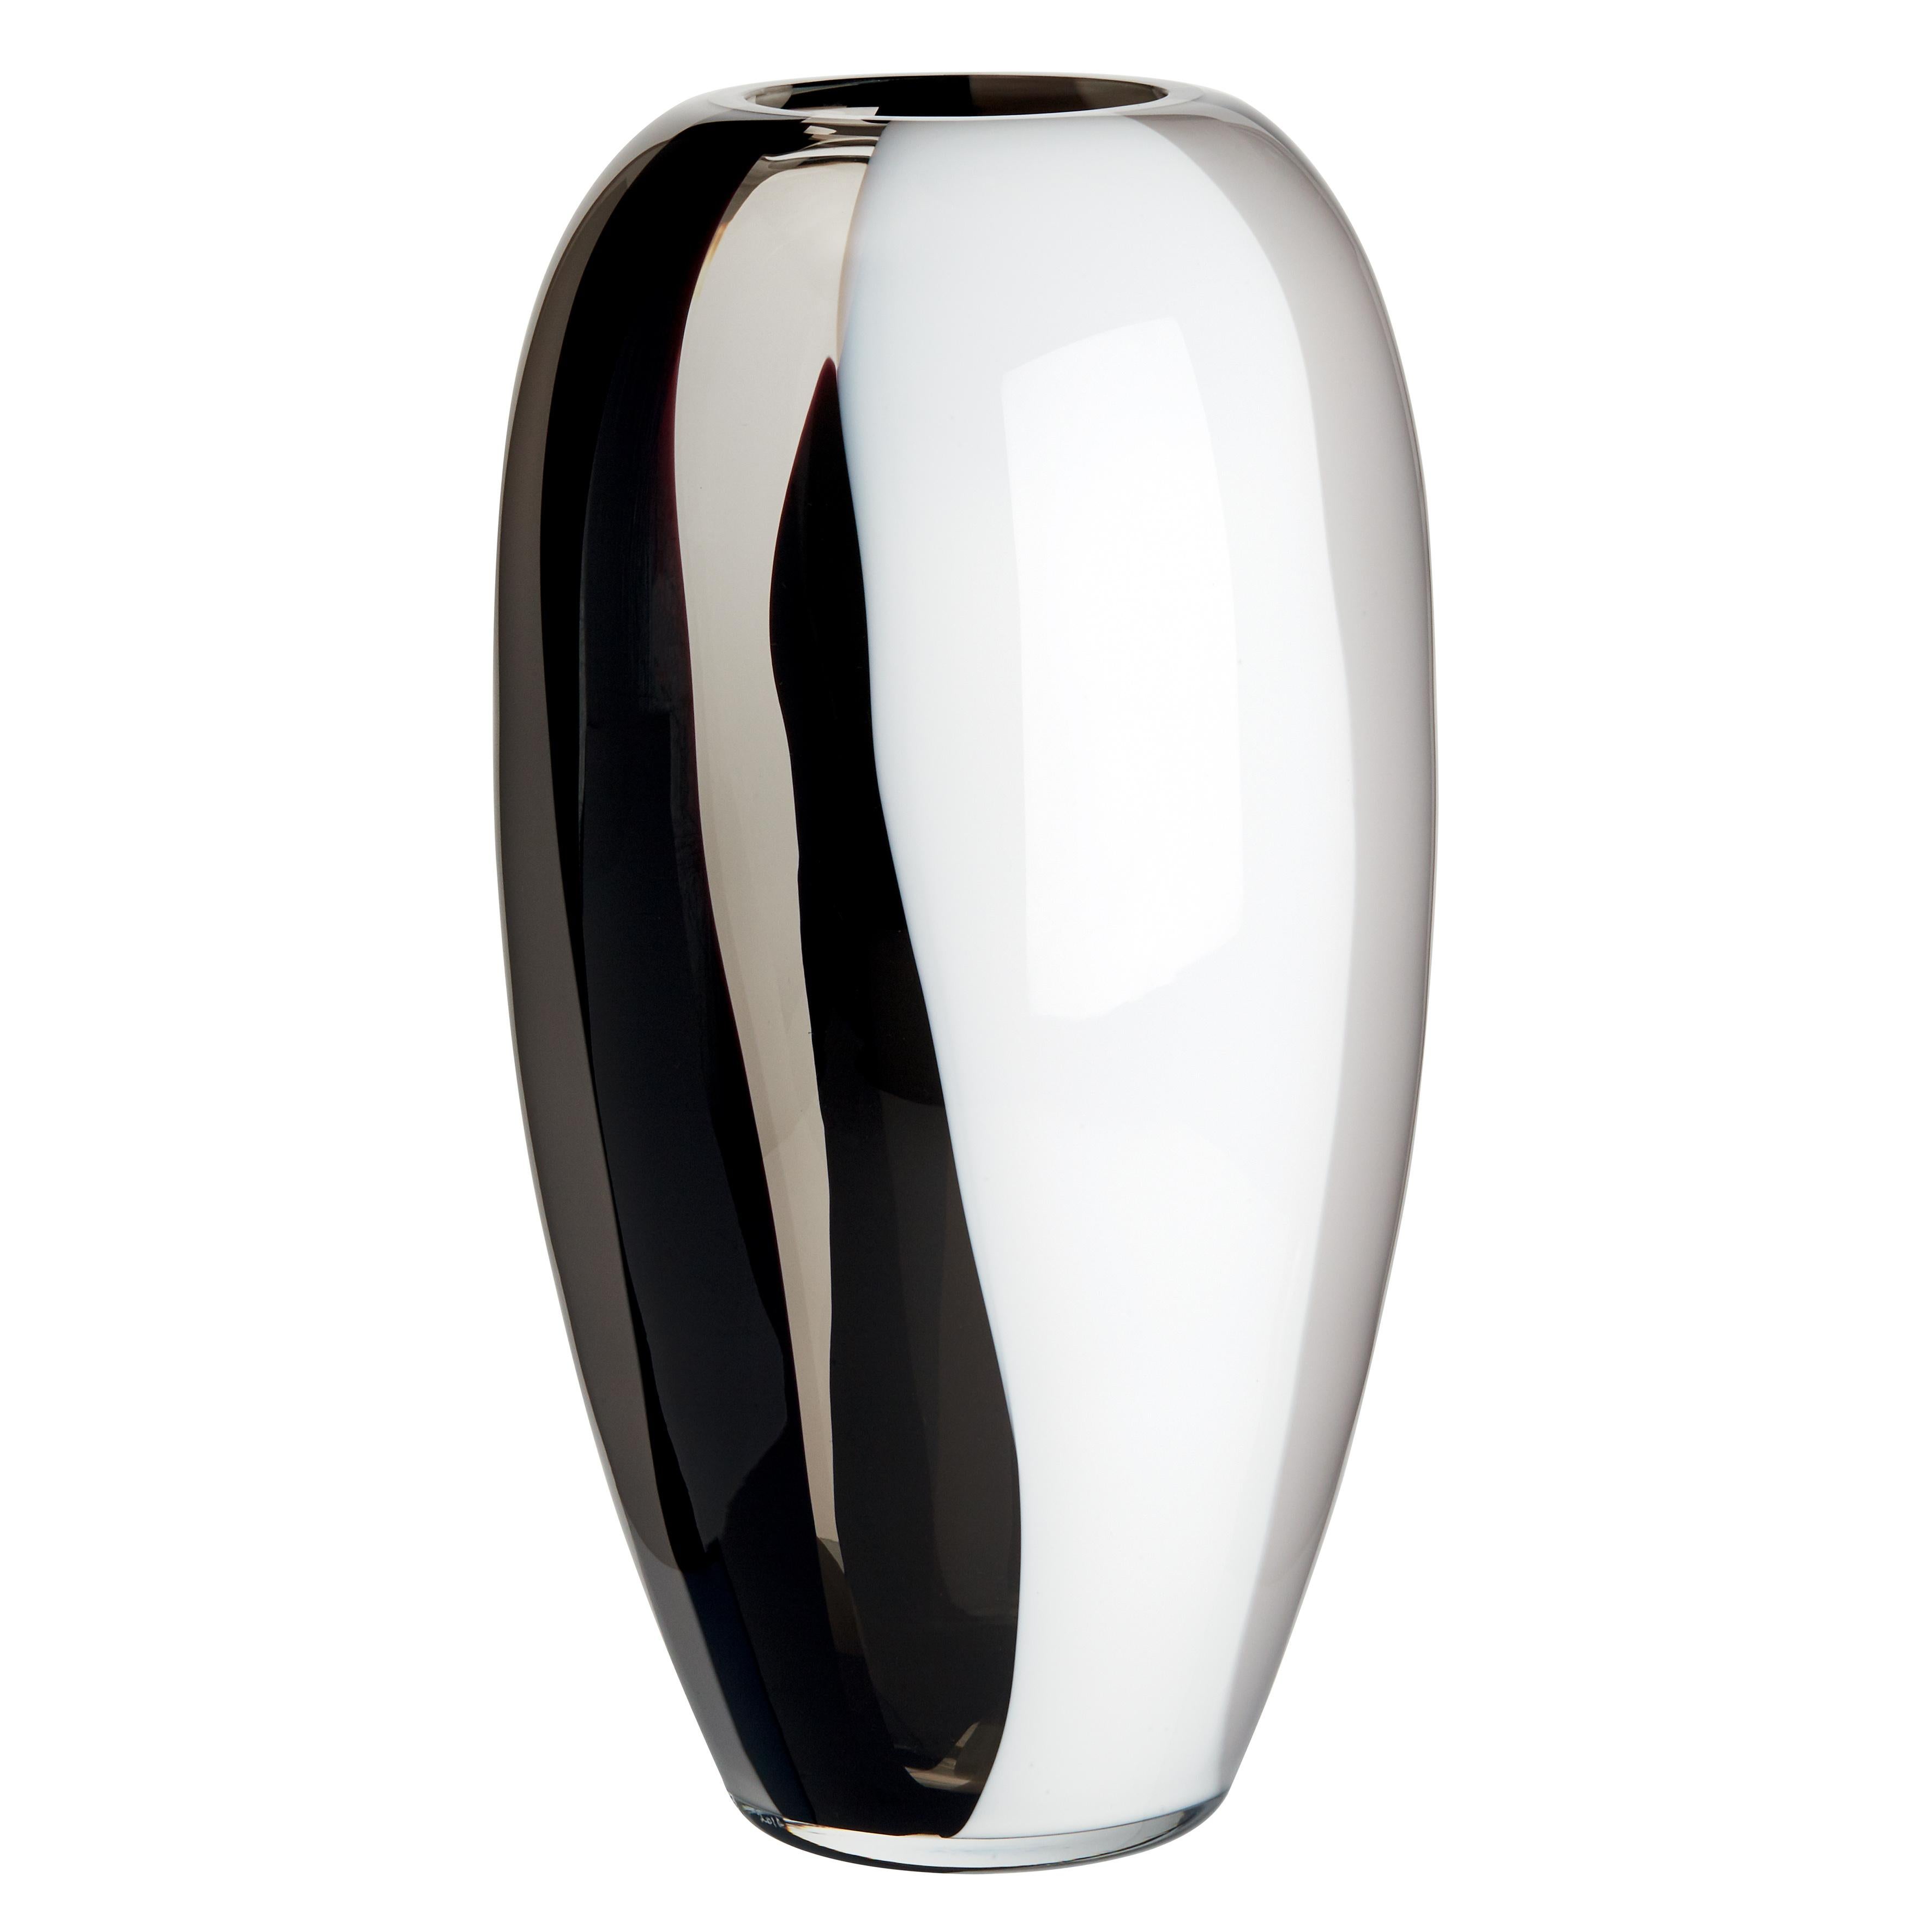 The elegance of simplicity. Ogiva is an axially symmetrical slender vase that catches your eye from every angle. The version uniting the transparency of the steel crystal with the opaque milk white, grey and black colors is both modern and